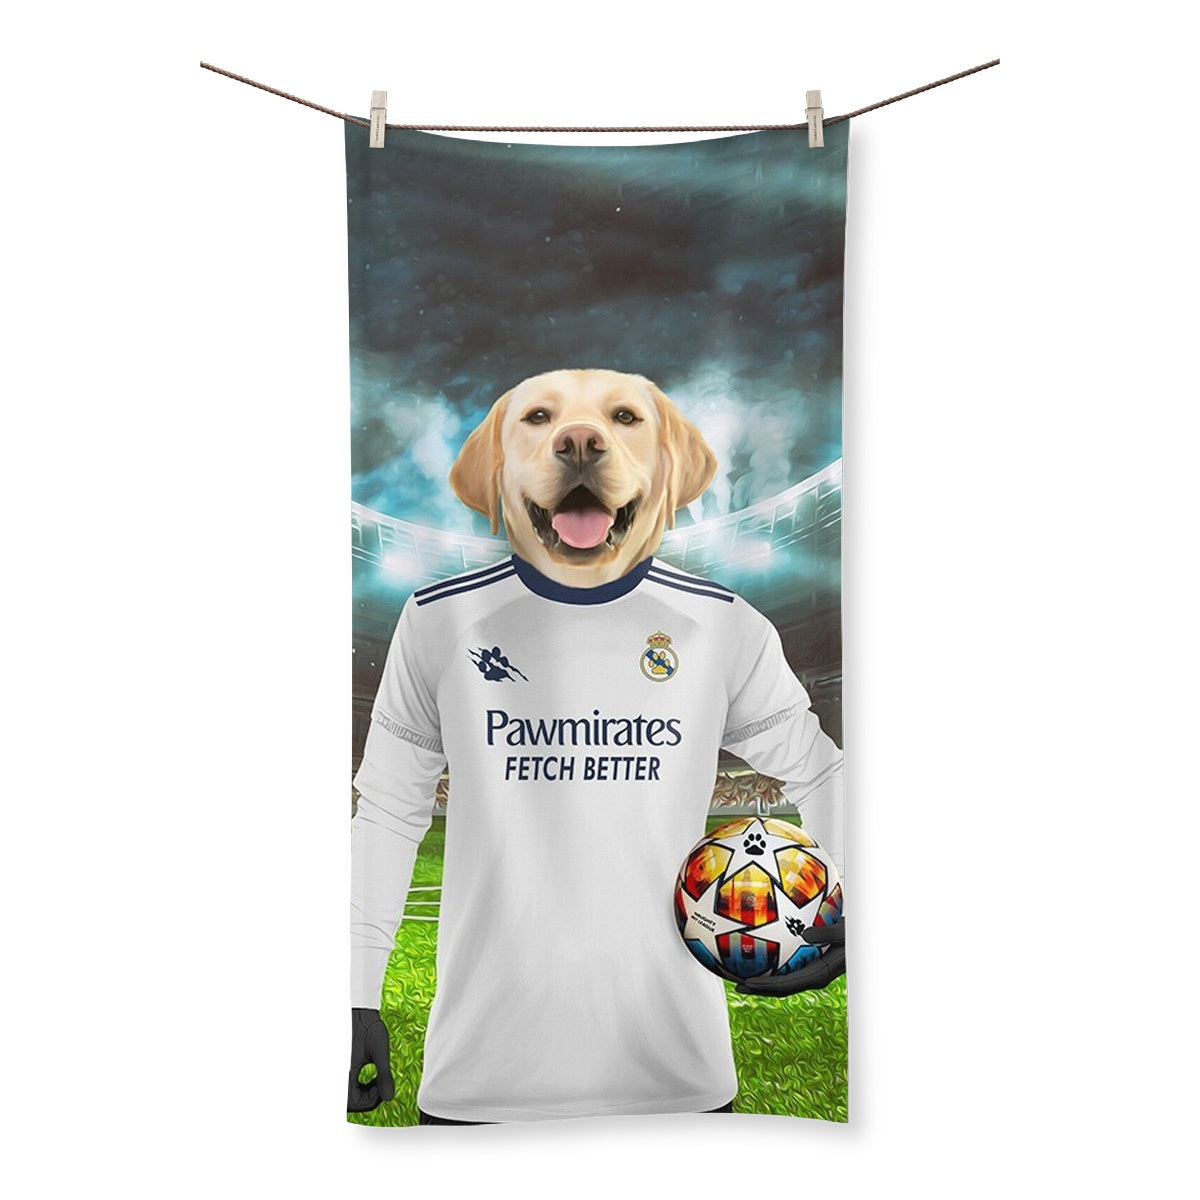 Real Pawdrid Football Club Paw & Glory, paw and glory, blanket with pets face, personalised blankets for dogs, dog printed blanket, custom pet photo blanket, custom pet blanket, paw blanket, Pet Portrait blanket,